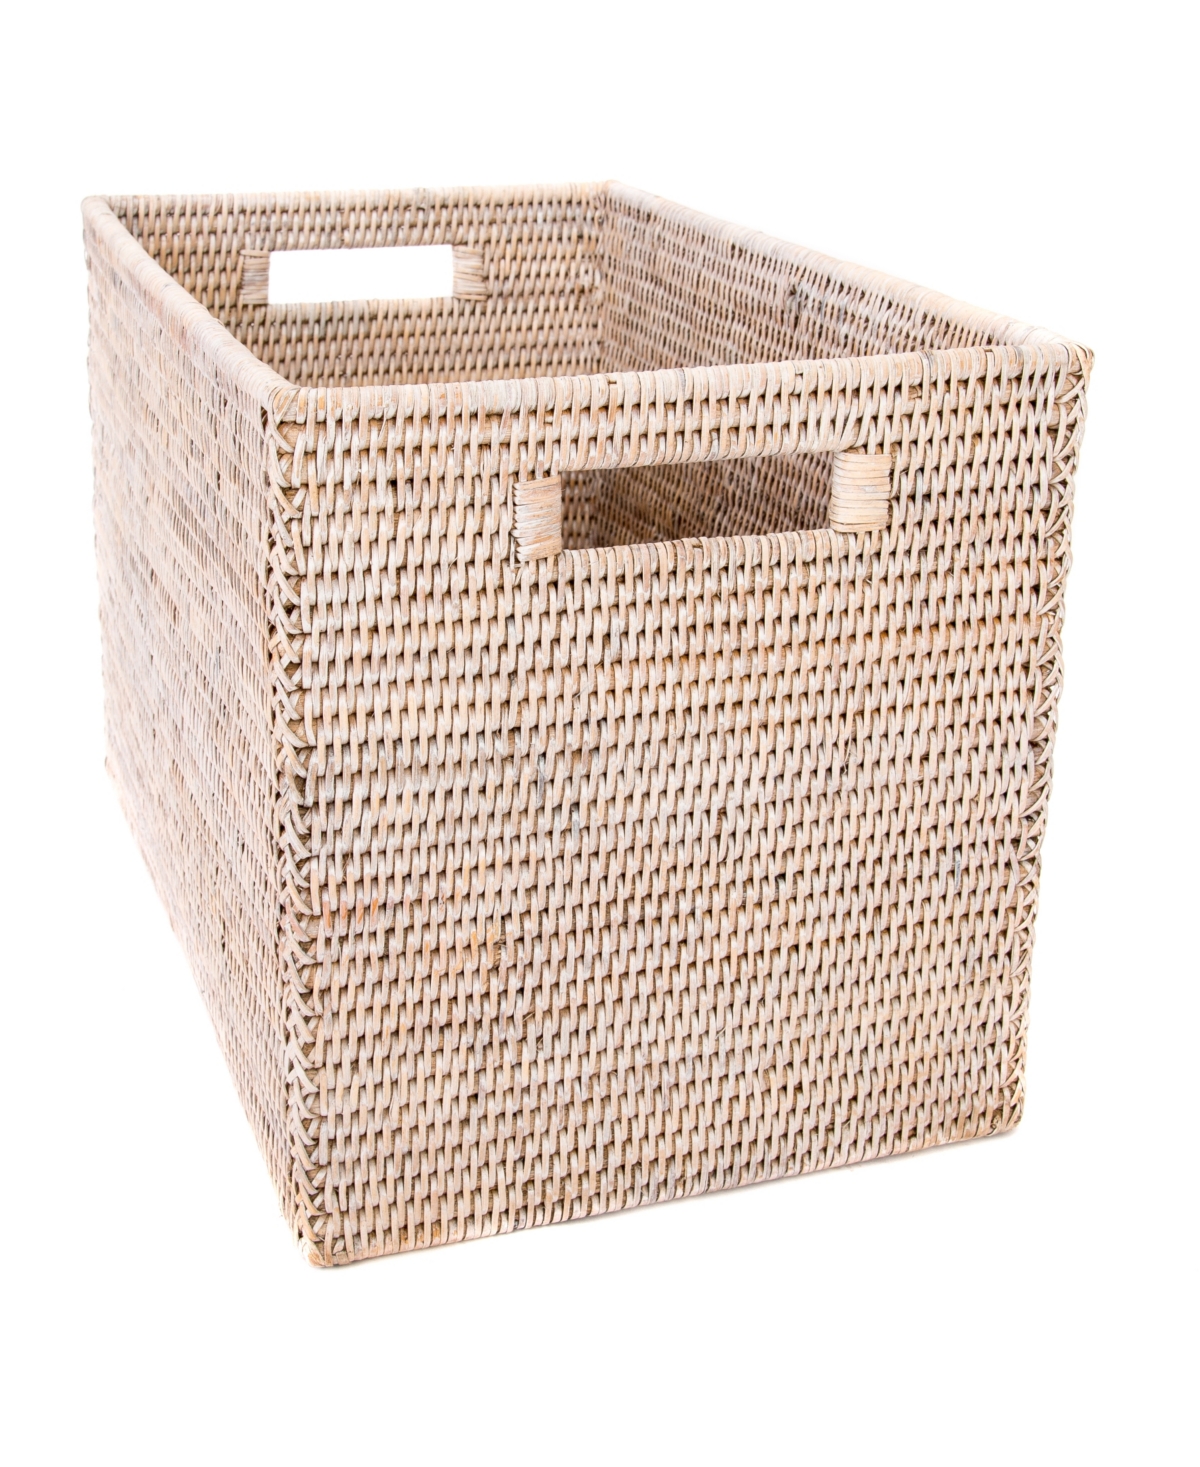 Artifacts Trading Company Artifacts Rattan Storage Box Legal File In Off-white